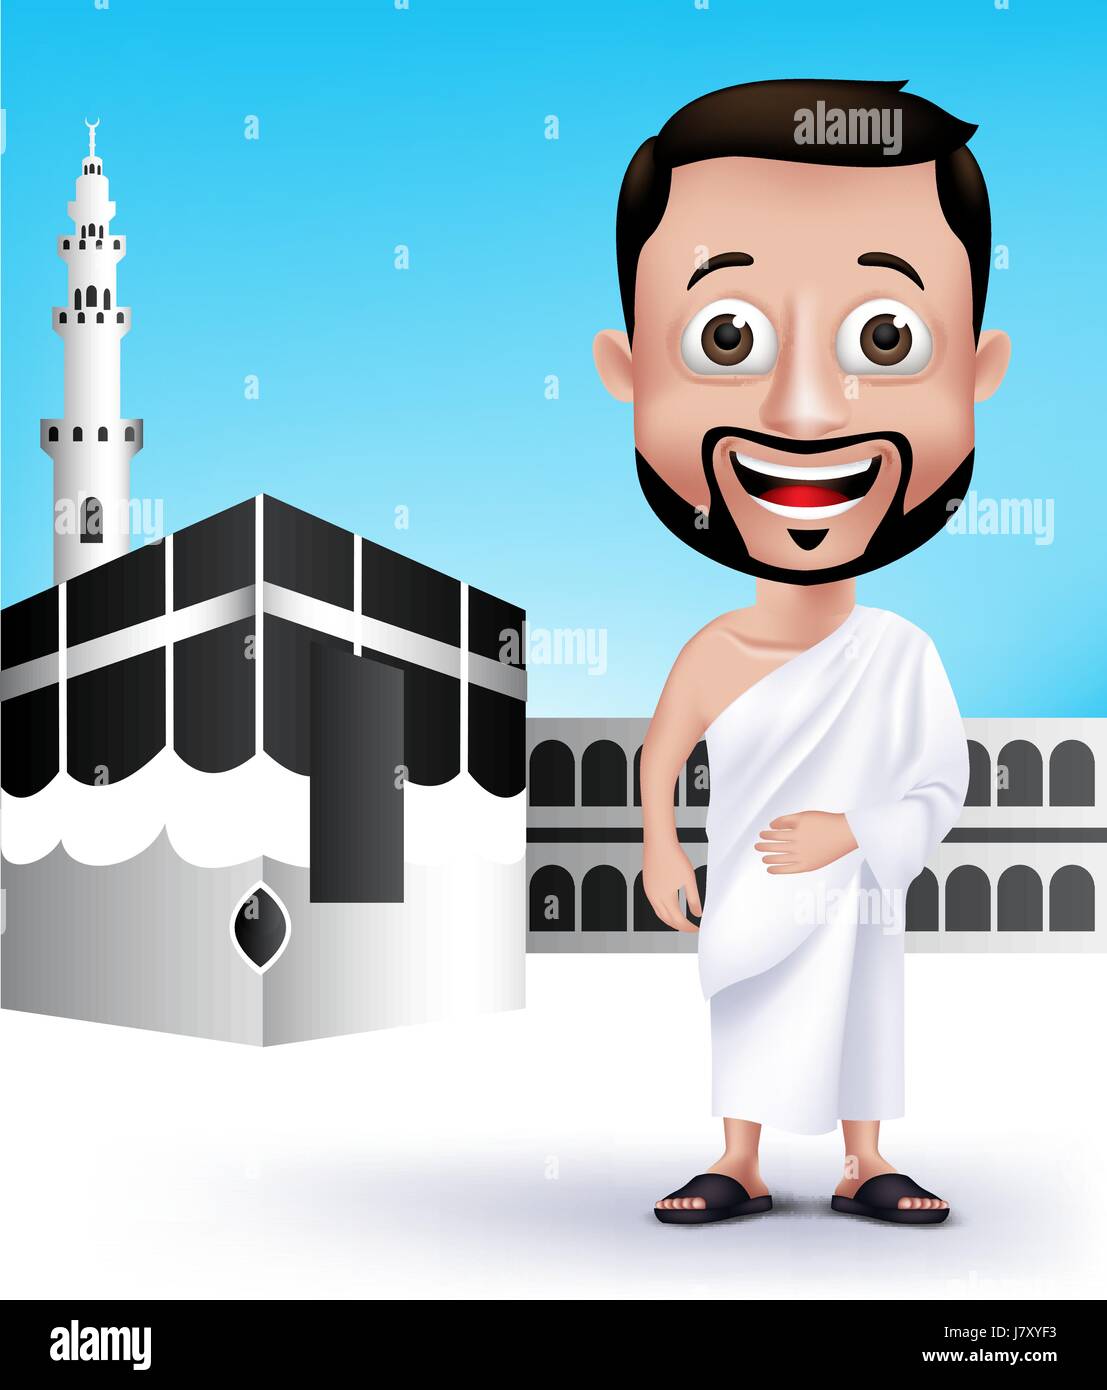 Vector Muslim Man Character Wearing Ihram Cloths for Performing Hajj or Umrah Pilgrimage in Kaaba in Makkah with Black Stone in Background. Stock Vector